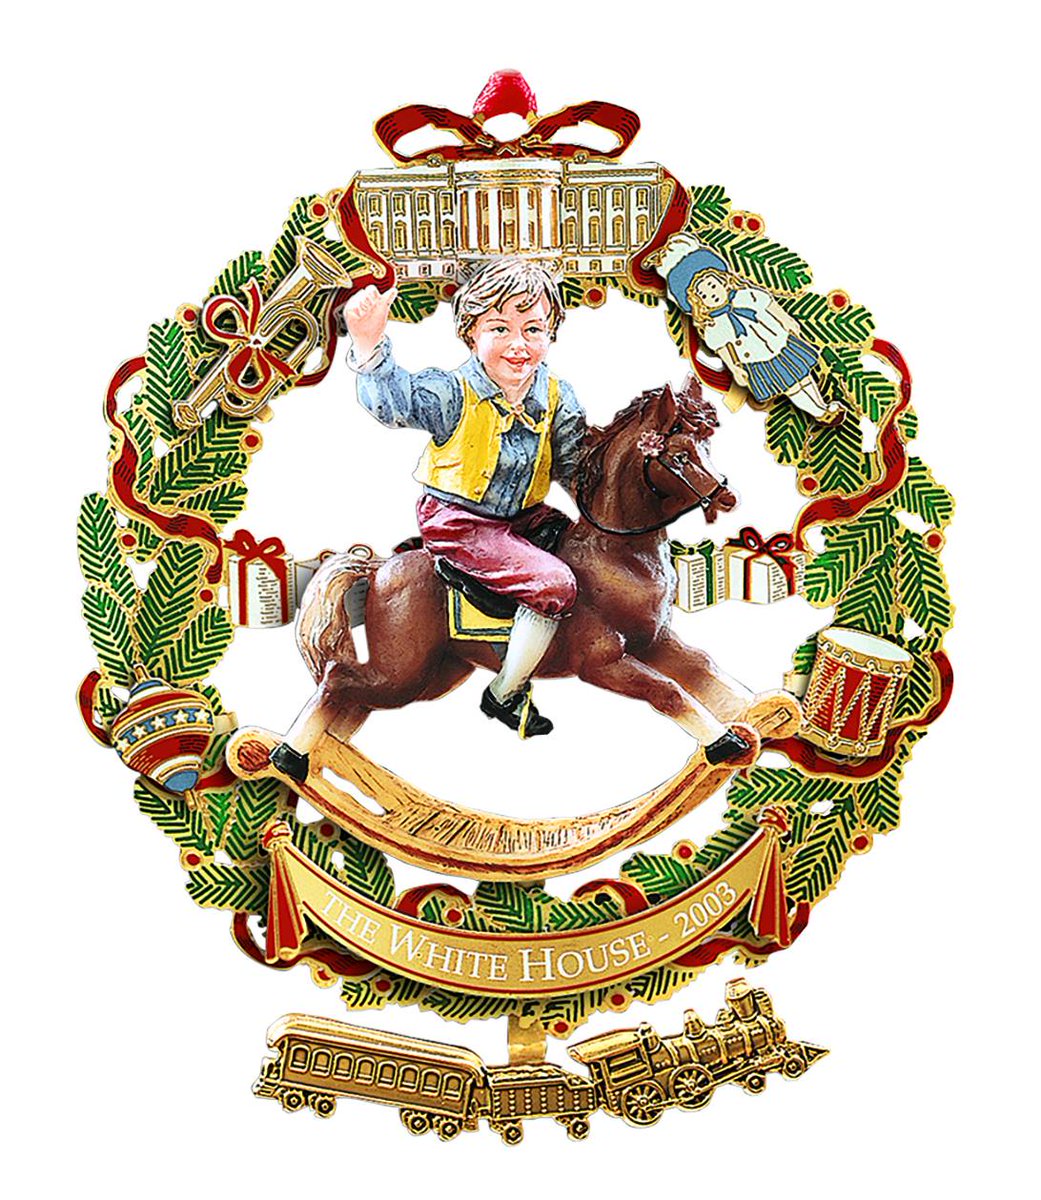 The 2003 ornament honors President Ulysses S. Grant and his family. Inspired by a Victorian illustration of a child’s joy at Christmas, this hand-painted porcelain figure is surrounded by a wreath of toys available during the Grant era (1869-77). https://shop.whitehousehistory.org/holidays/ornaments/2003-white-house-christmas-ornament-rocking-horse-honoring-ulysses-s-grant-18th-president-of-the-united-states-1869-77